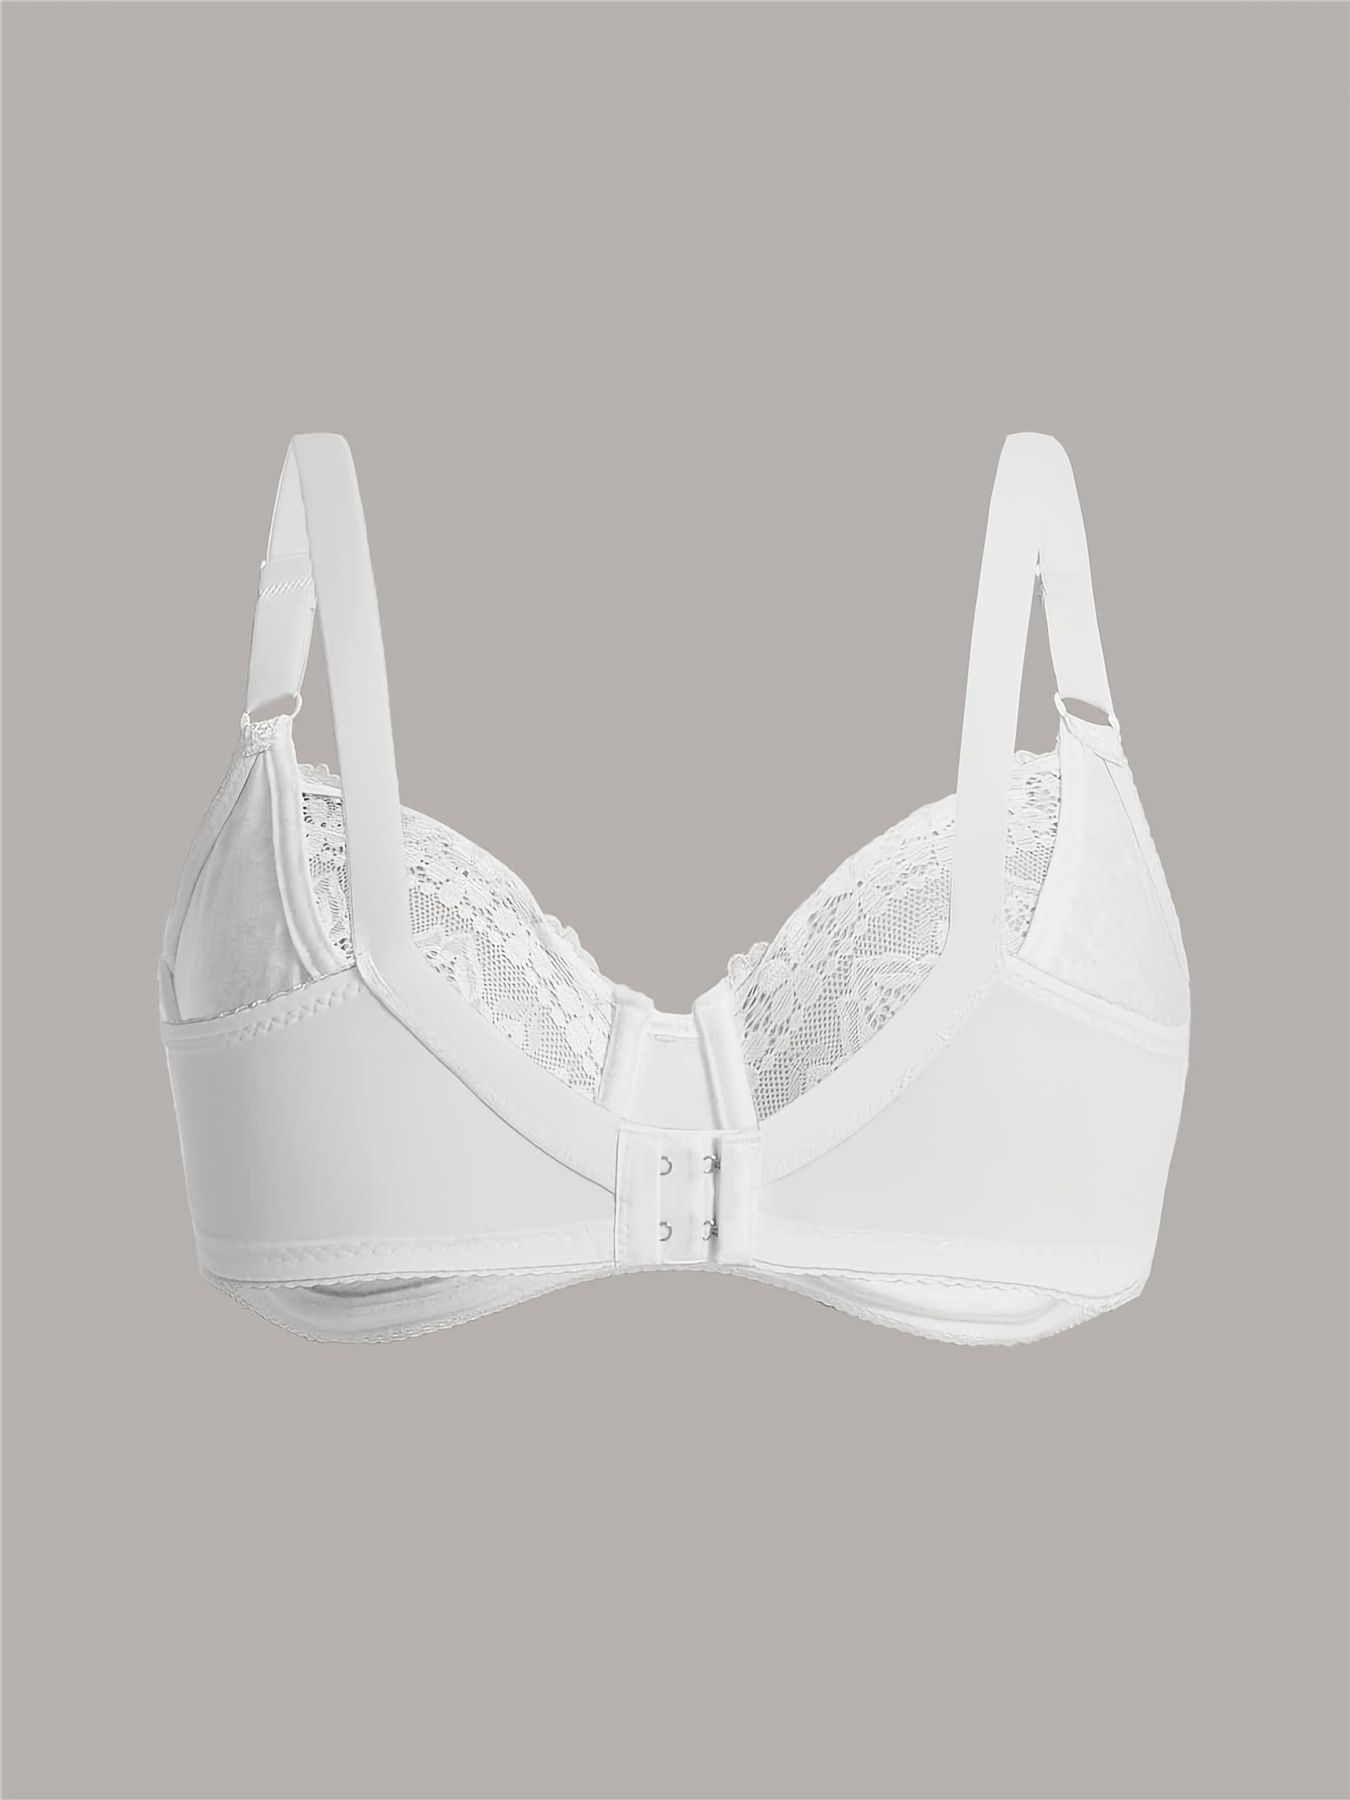 Highend Sexy Lace Push Up Bra Set Women Ultrathin Cup Bralette Breathable  Plus Size Underwear Classic Hollow Bras And Panties Q08606358 From 15,43 €